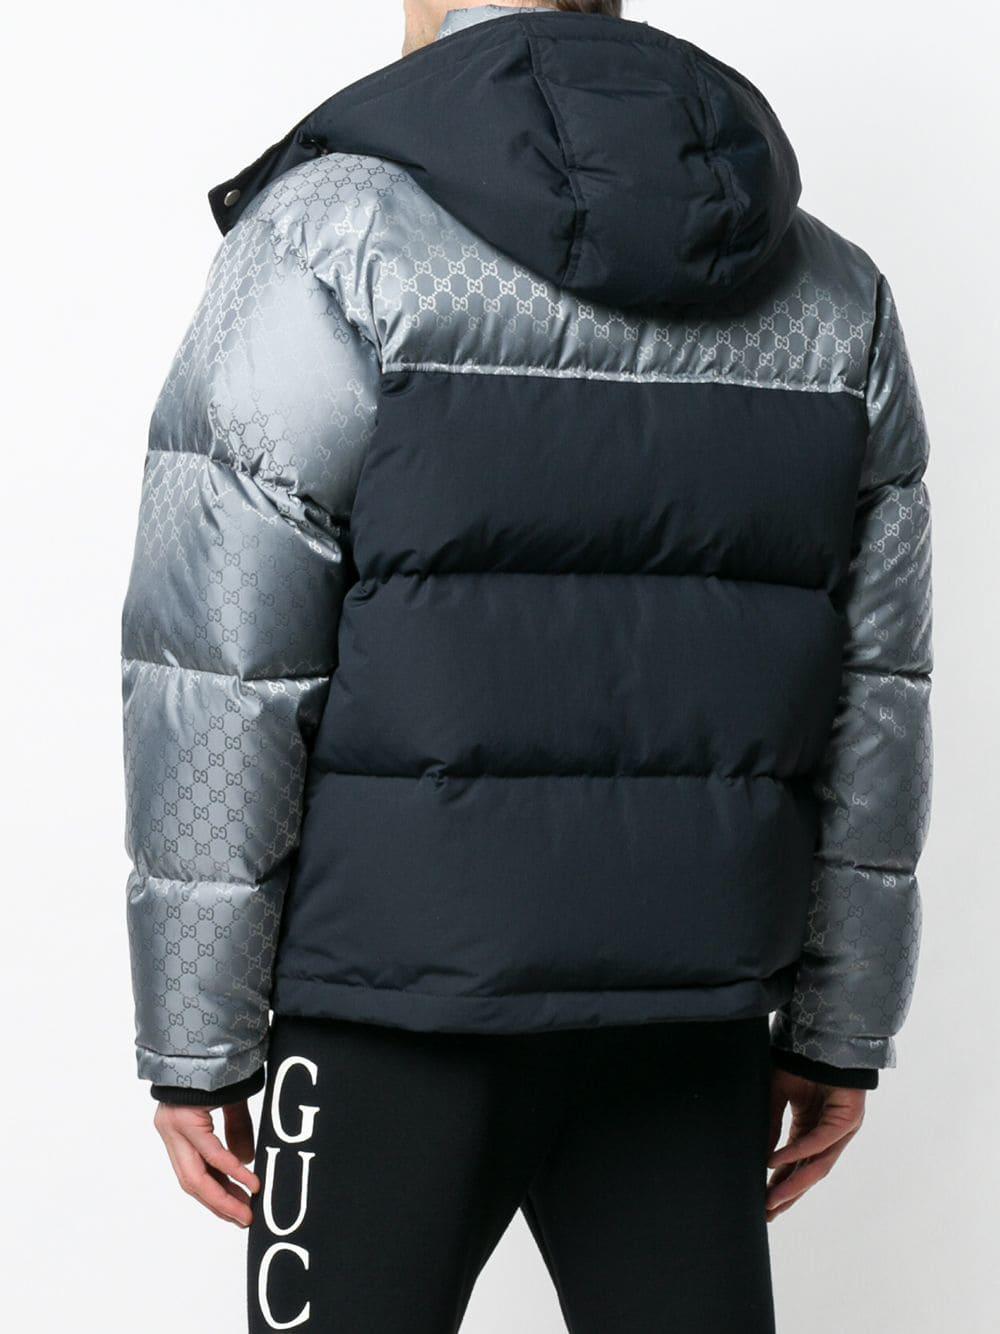 Gucci Wool Padded Jacket in Black for Men - Lyst